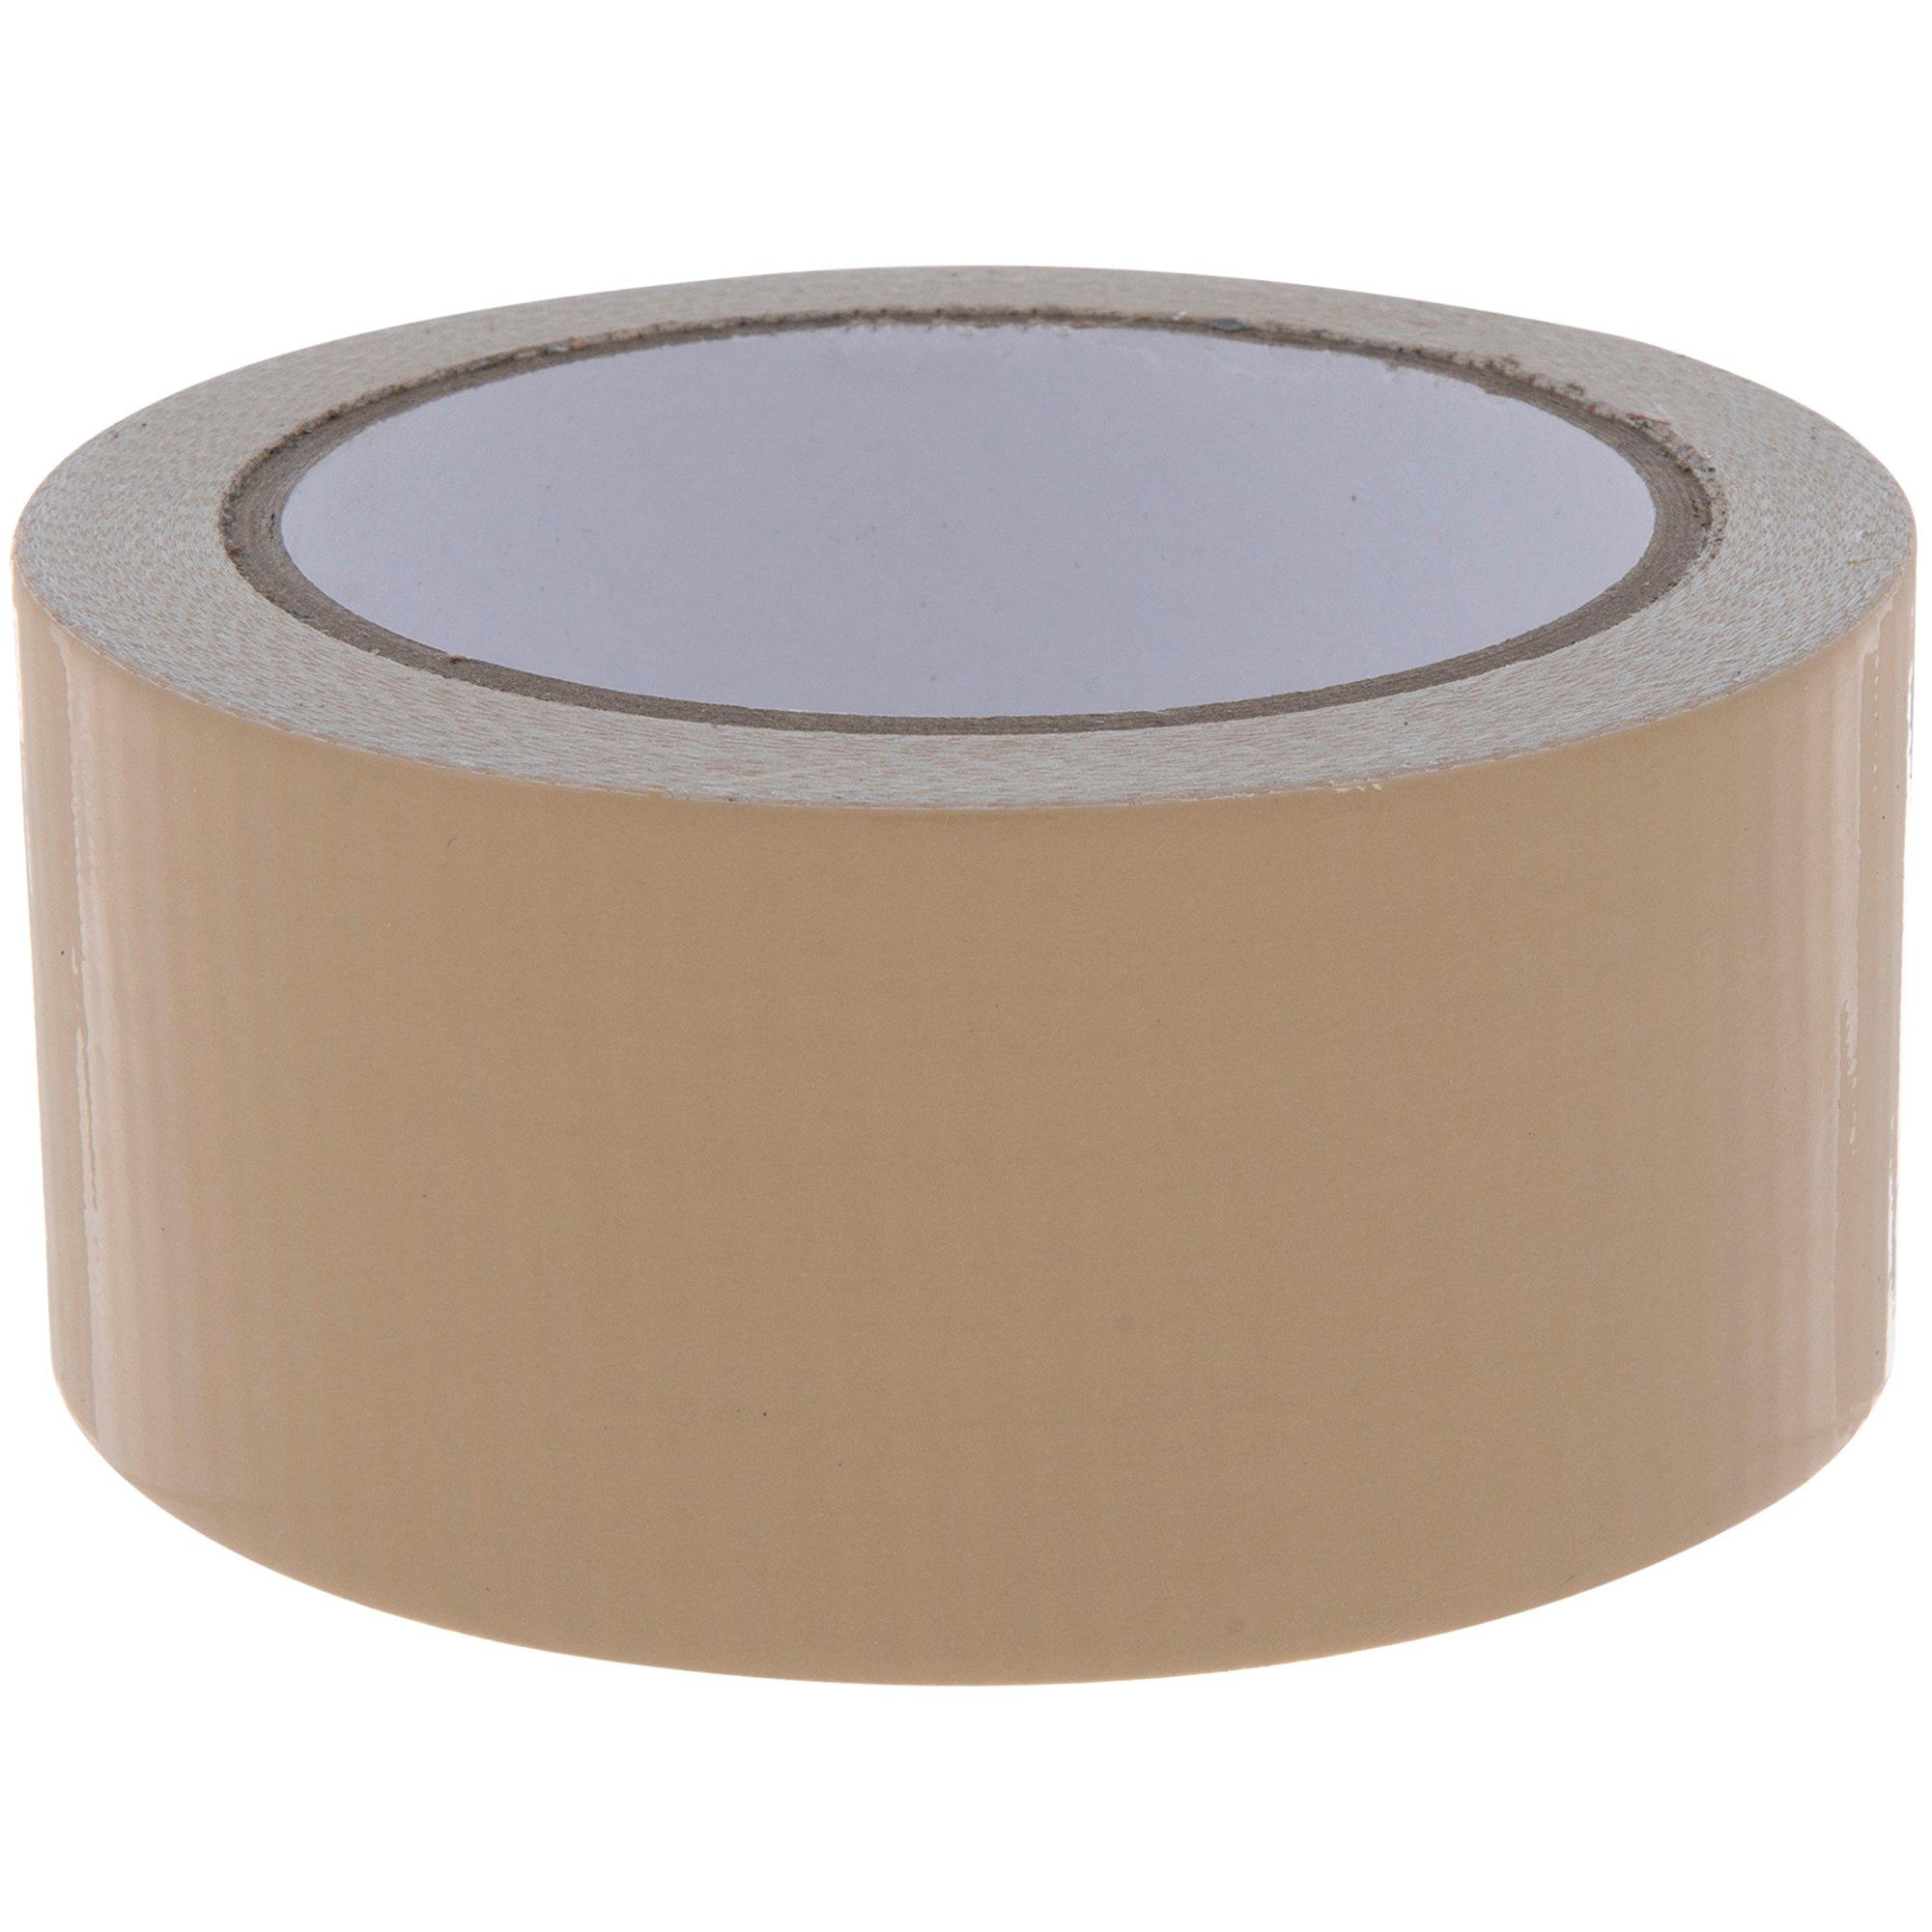 Duck Tape Heavy Duty Self-Adhesive Duct Tape, 1-7/8 Inches x 20